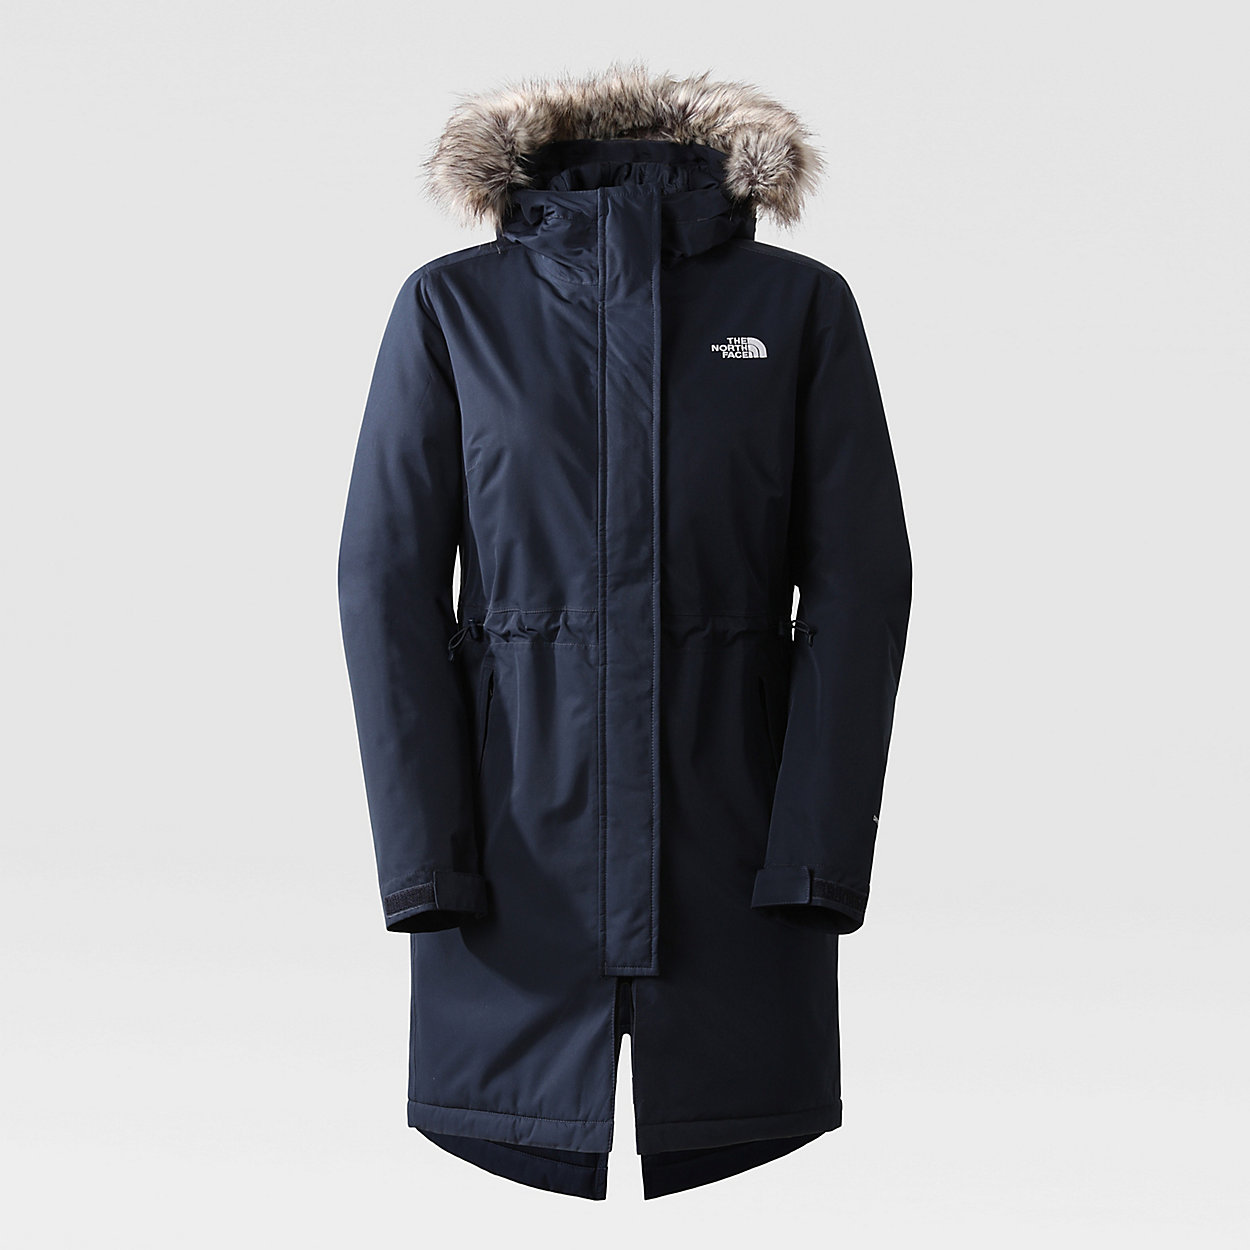 Unlock Wilderness' choice in the Berghaus Vs North Face comparison, the Recycled Zaneck Parka by The North Face